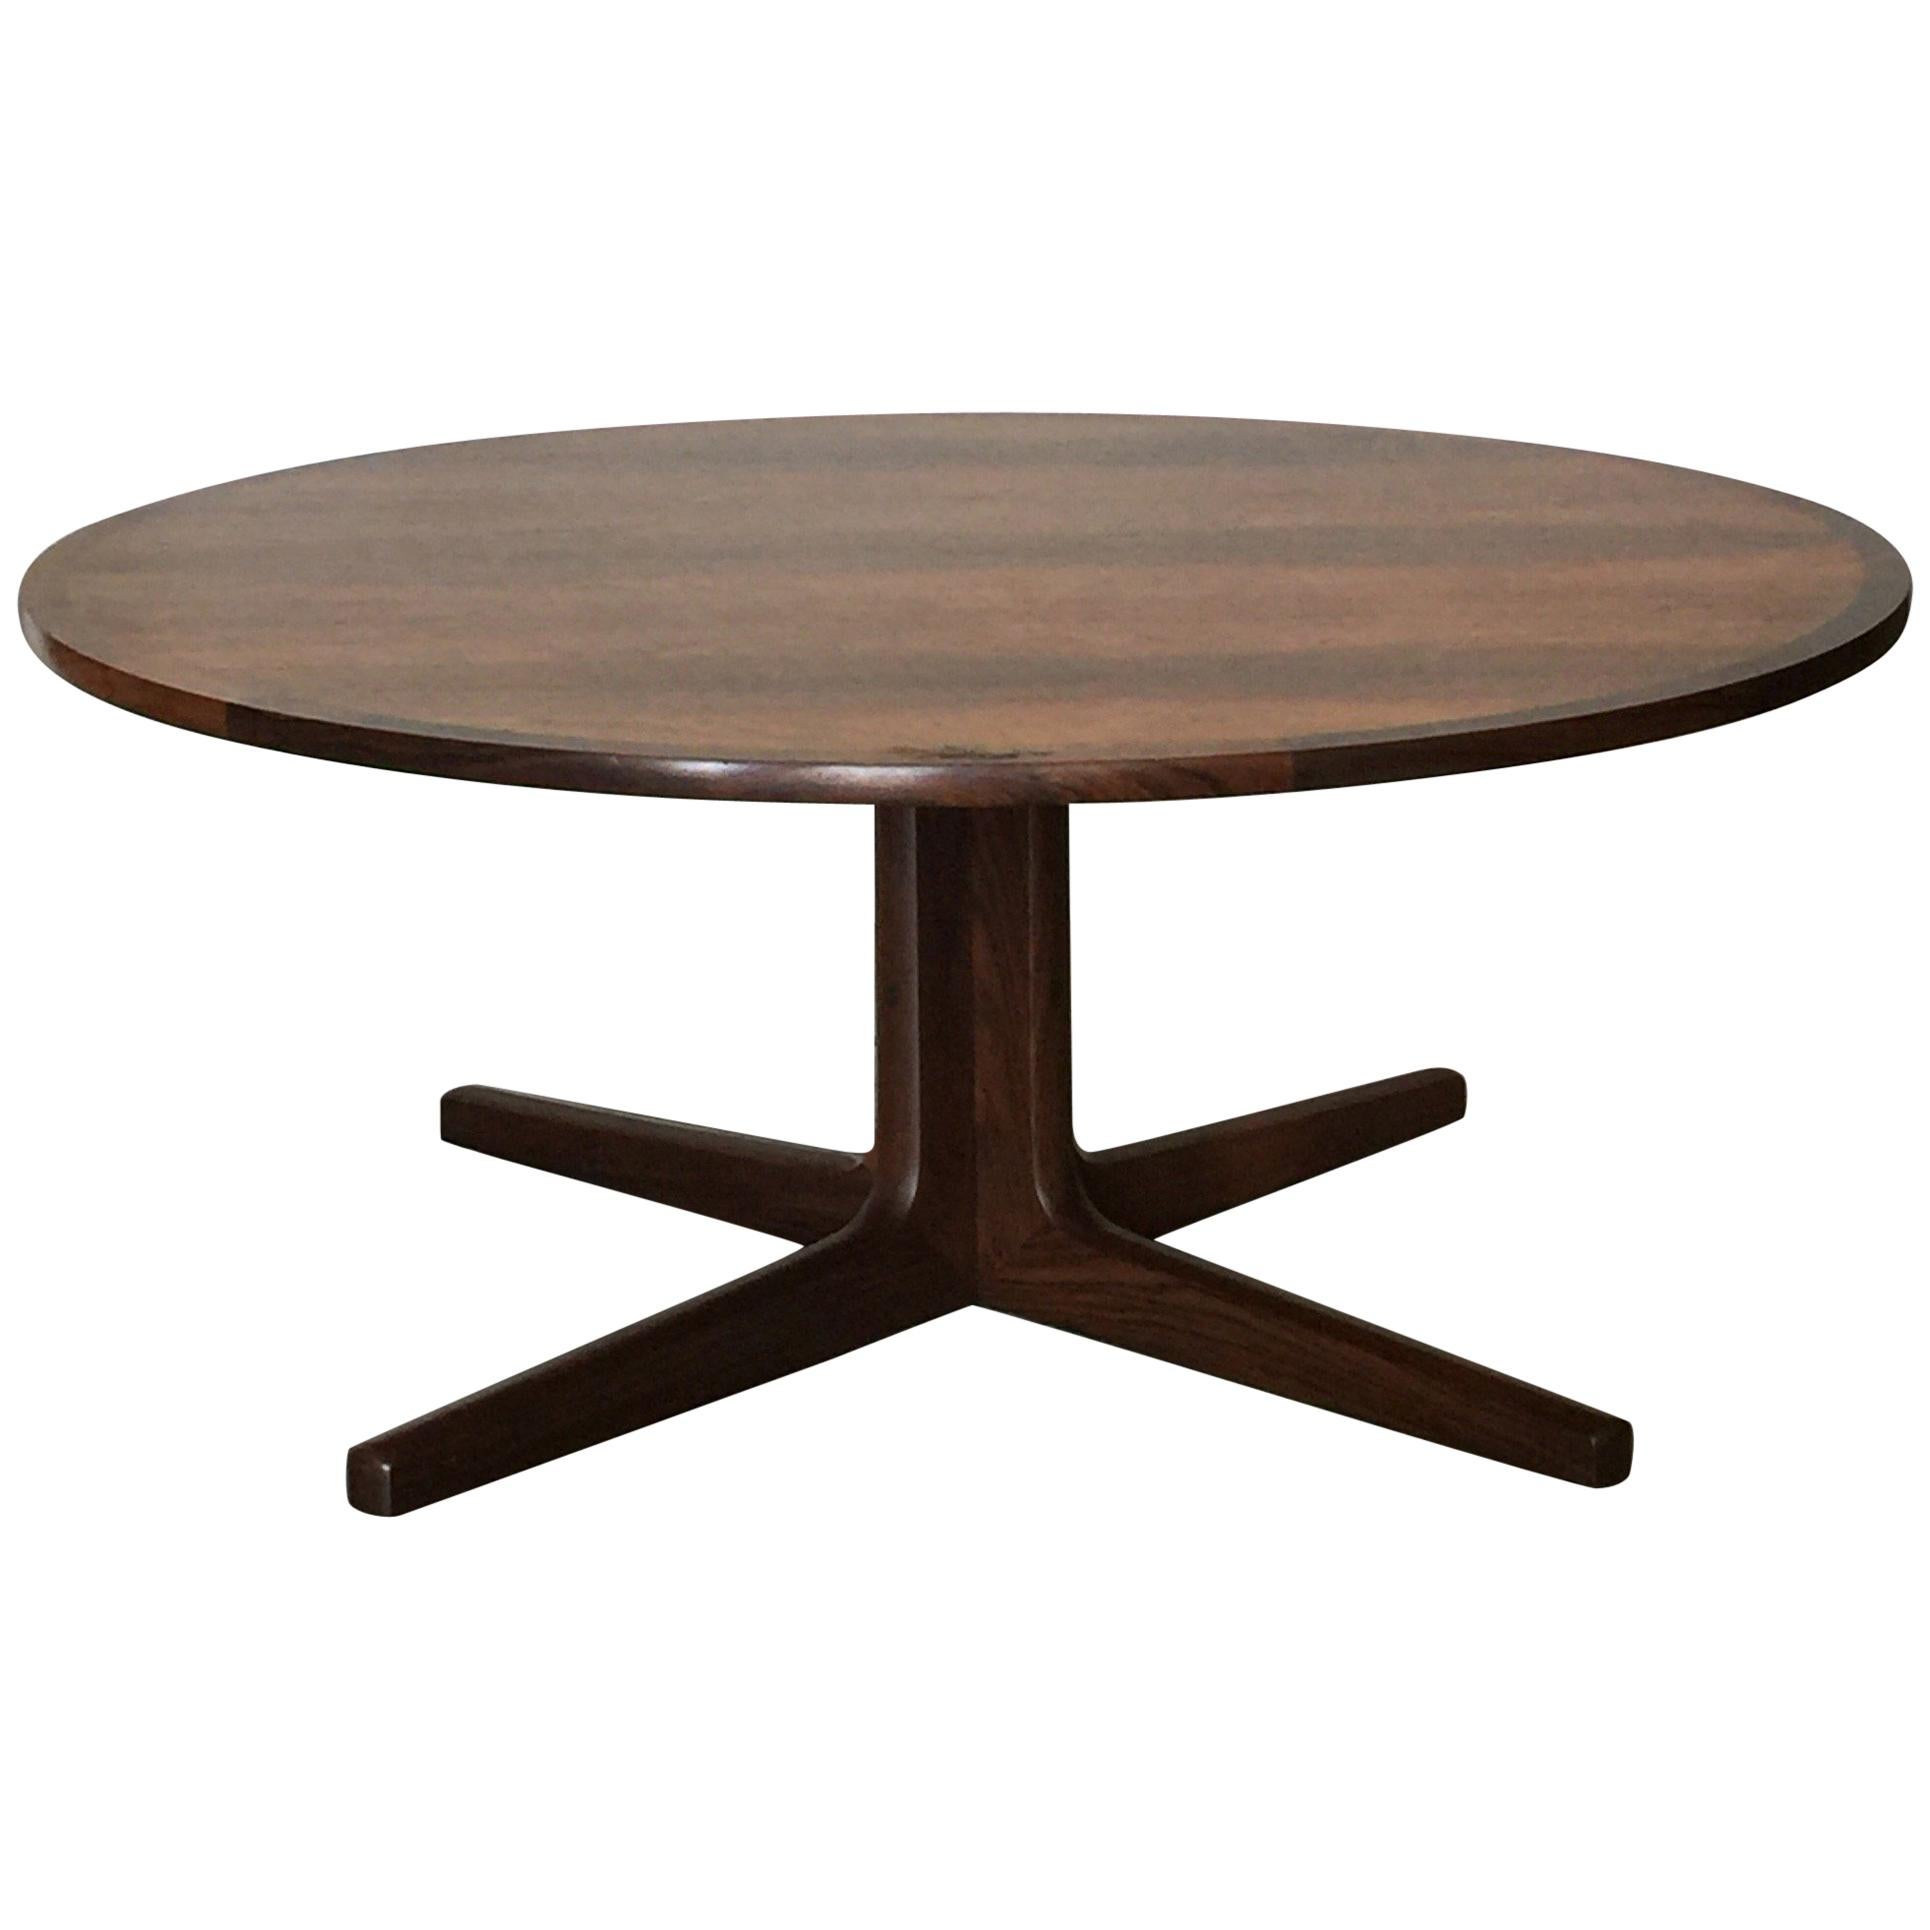 Impeccable Hans C. Andersen Danish Rosewood Round Coffee Table